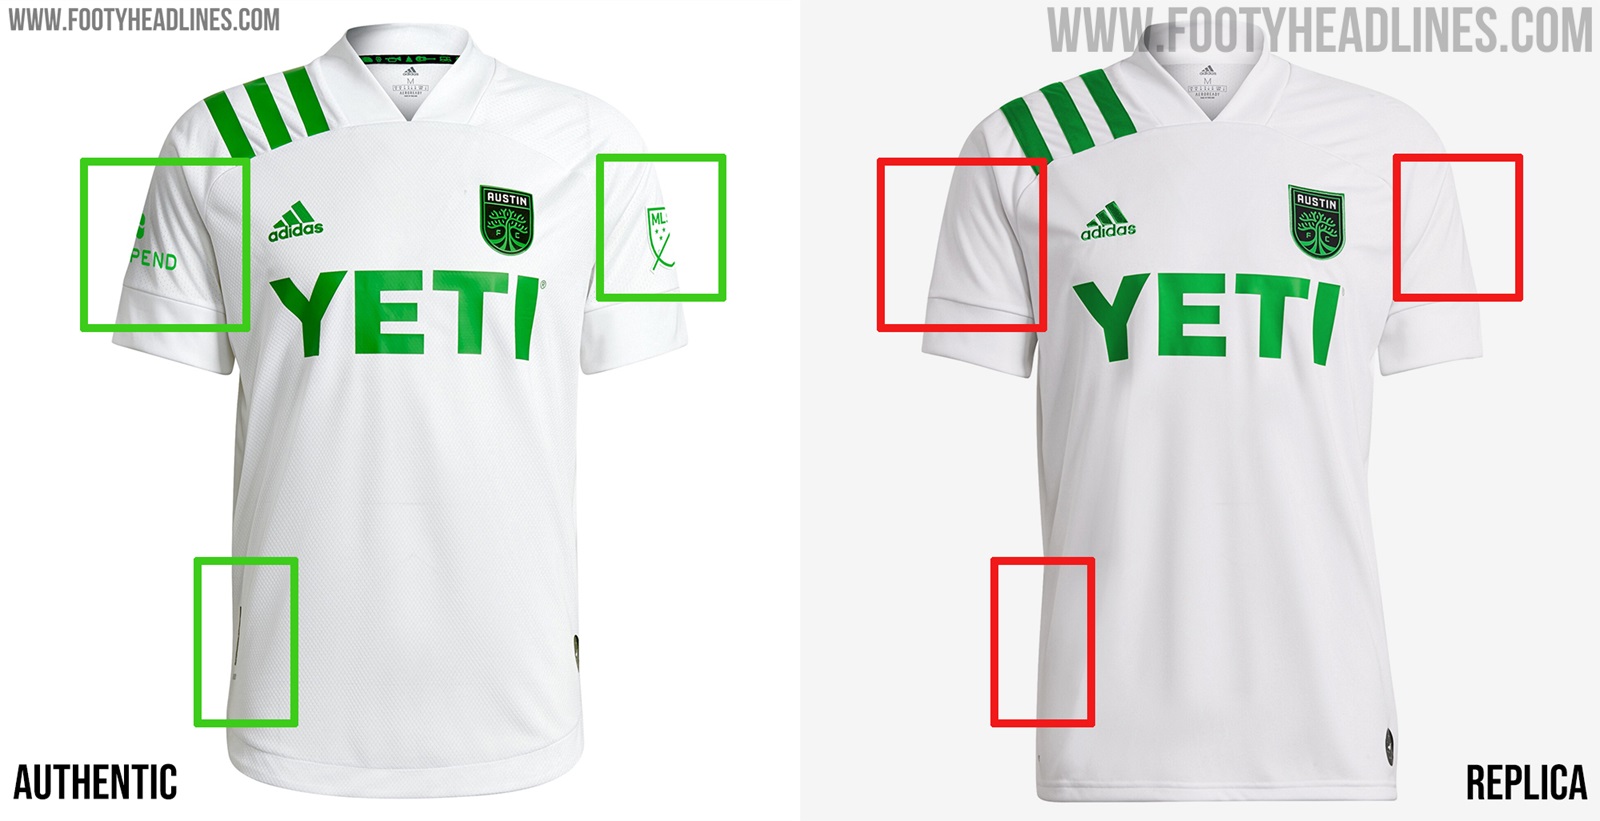 Adidas MLS 2021 Authentic vs Replica Kits - Horrible For Some